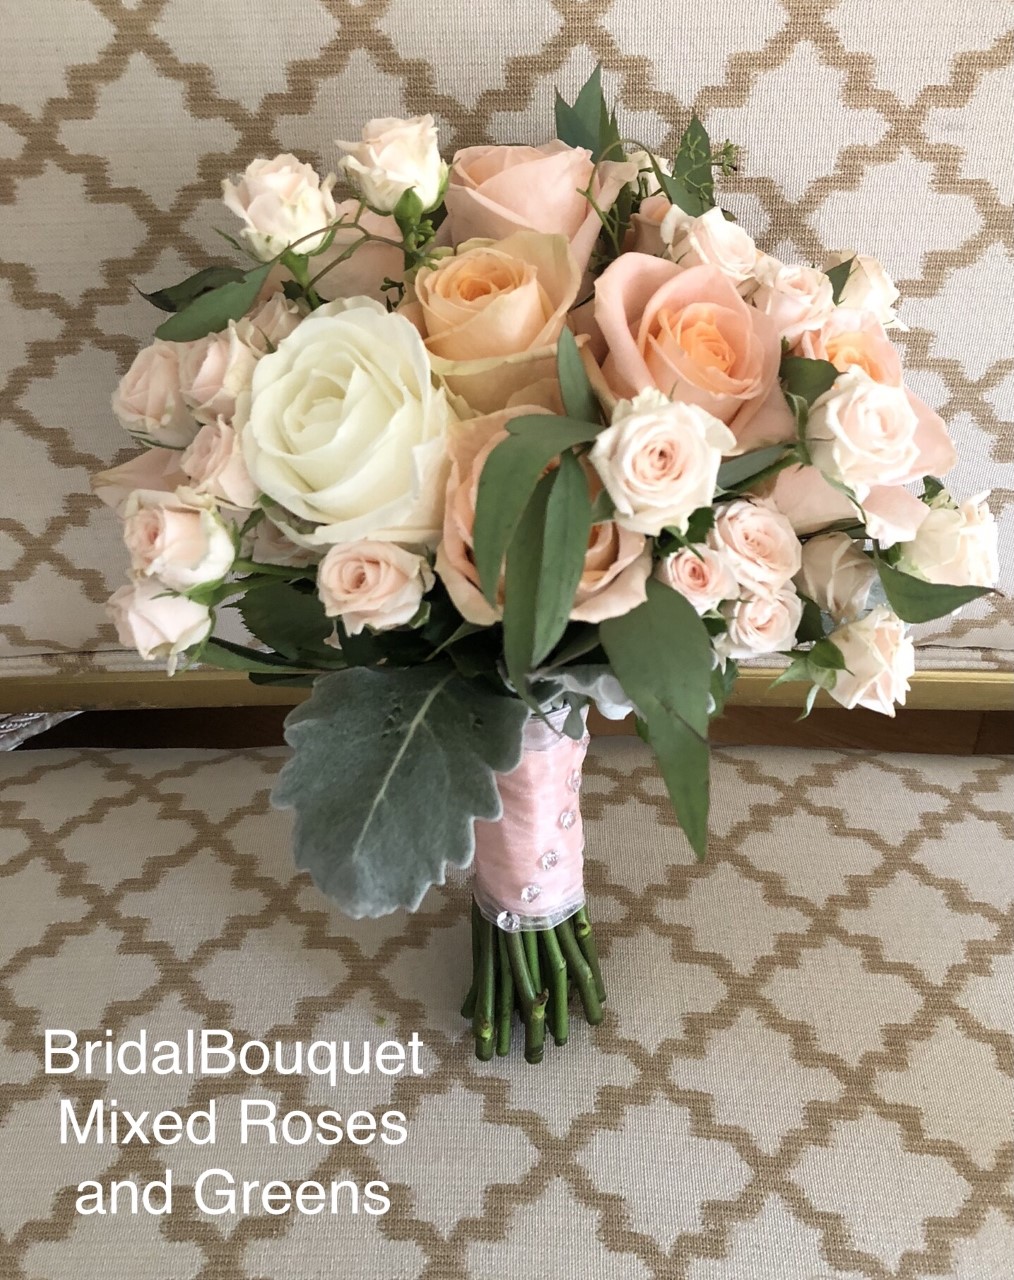 $165 - 2 tone big roses and 1 tone small roses and 2 types of greens Bridal Bouquet                                                      